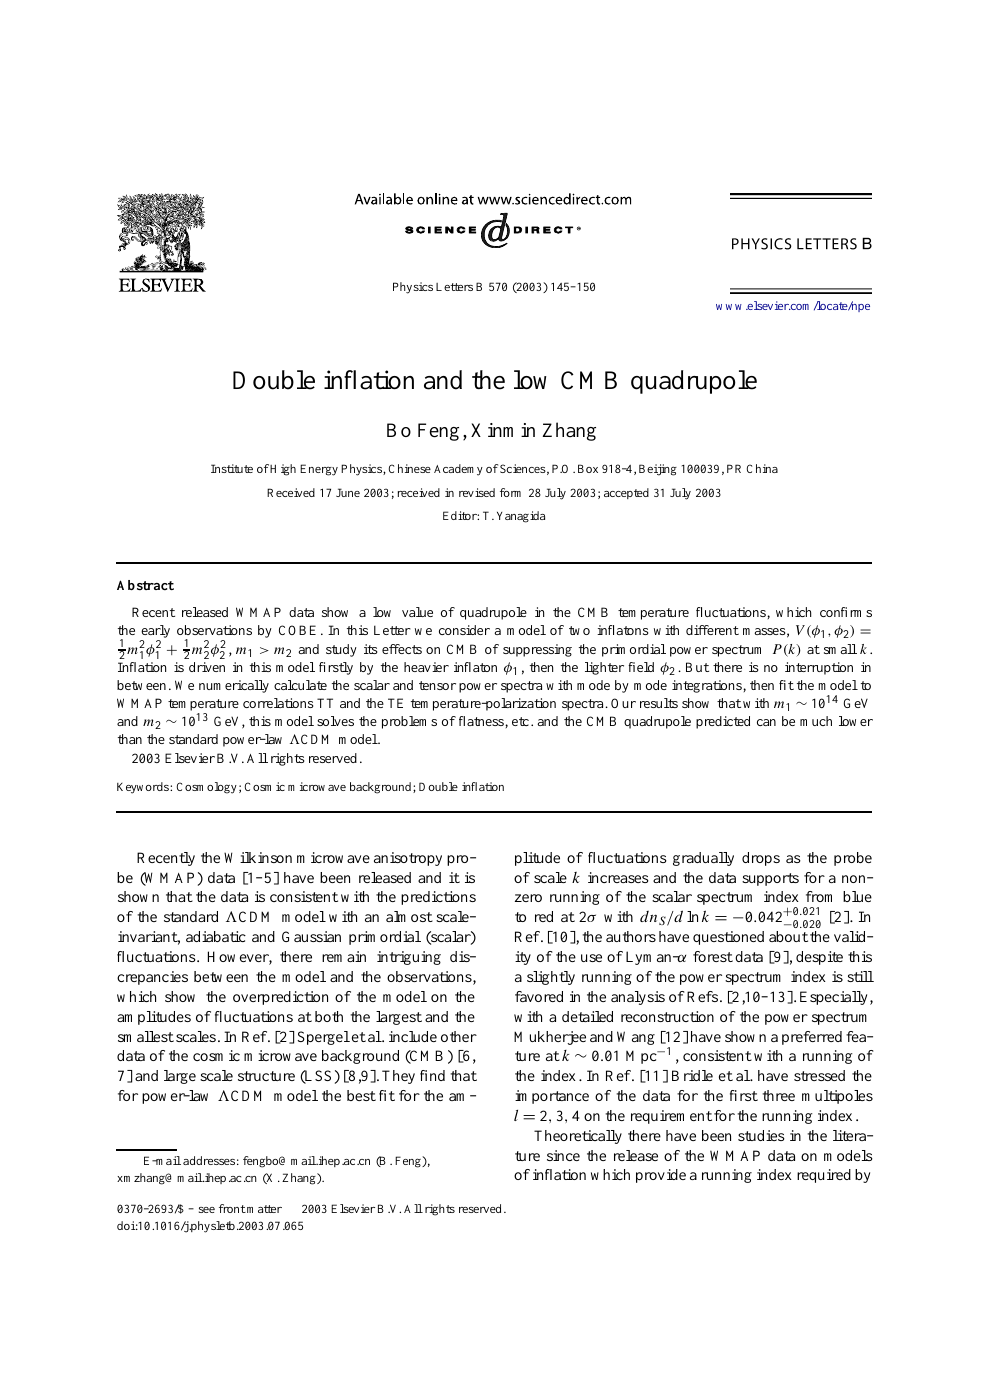 Double Inflation And The Low Cmb Quadrupole Topic Of Research Paper In Physical Sciences Download Scholarly Article Pdf And Read For Free On Cyberleninka Open Science Hub